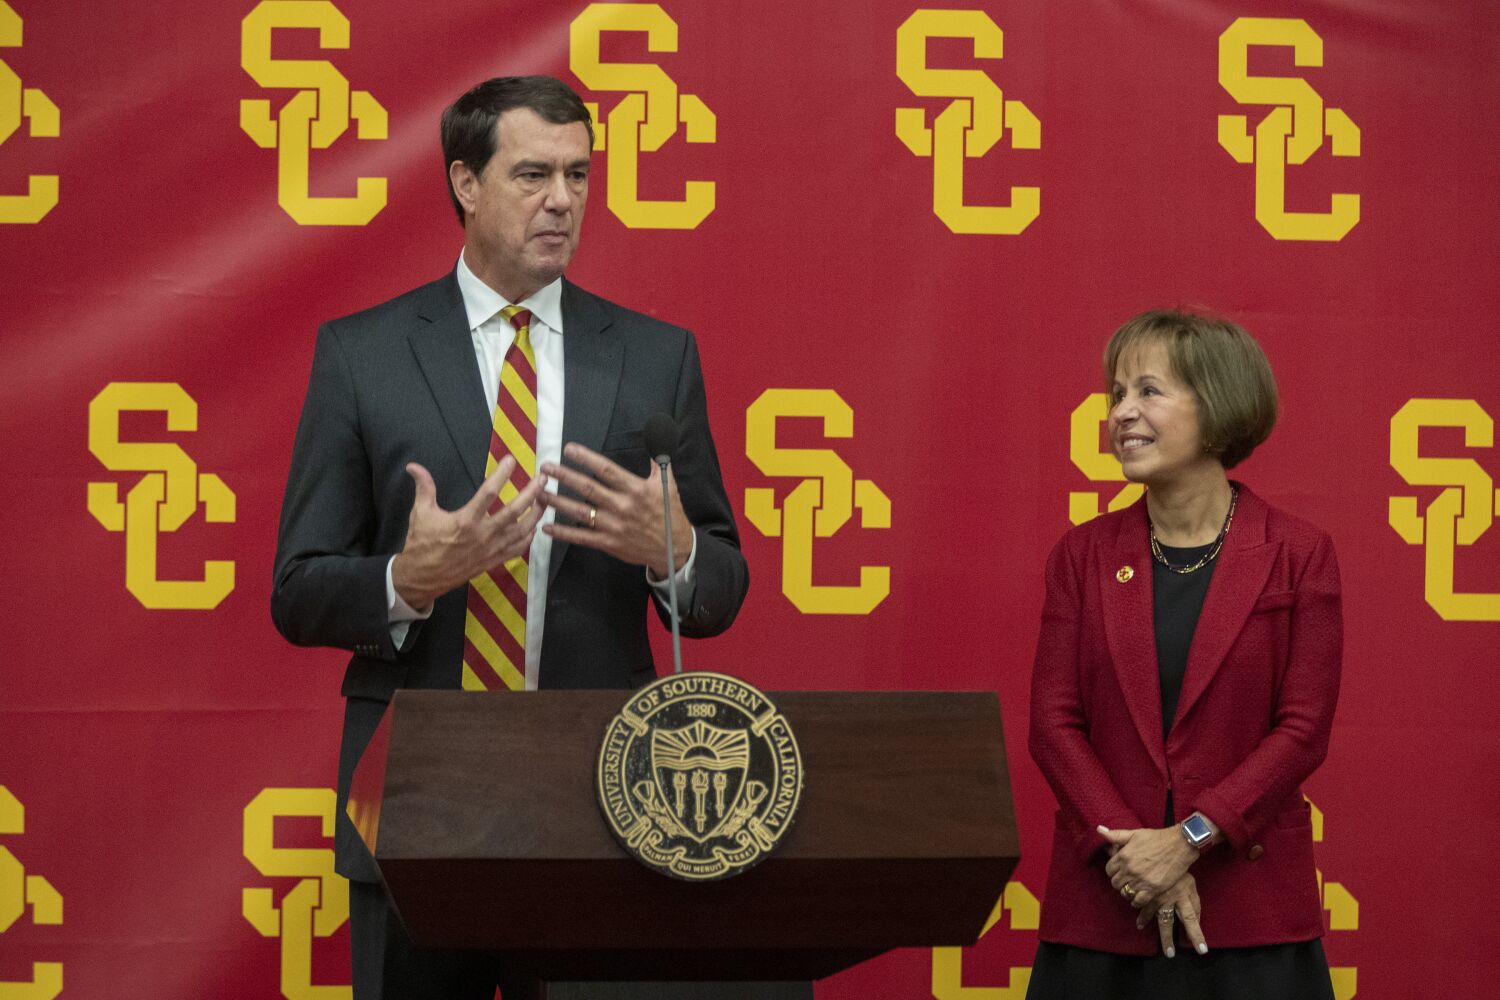 Plaschke: How did this happen again? USC and Carol Folt are responsible for the Mike Bohn mess